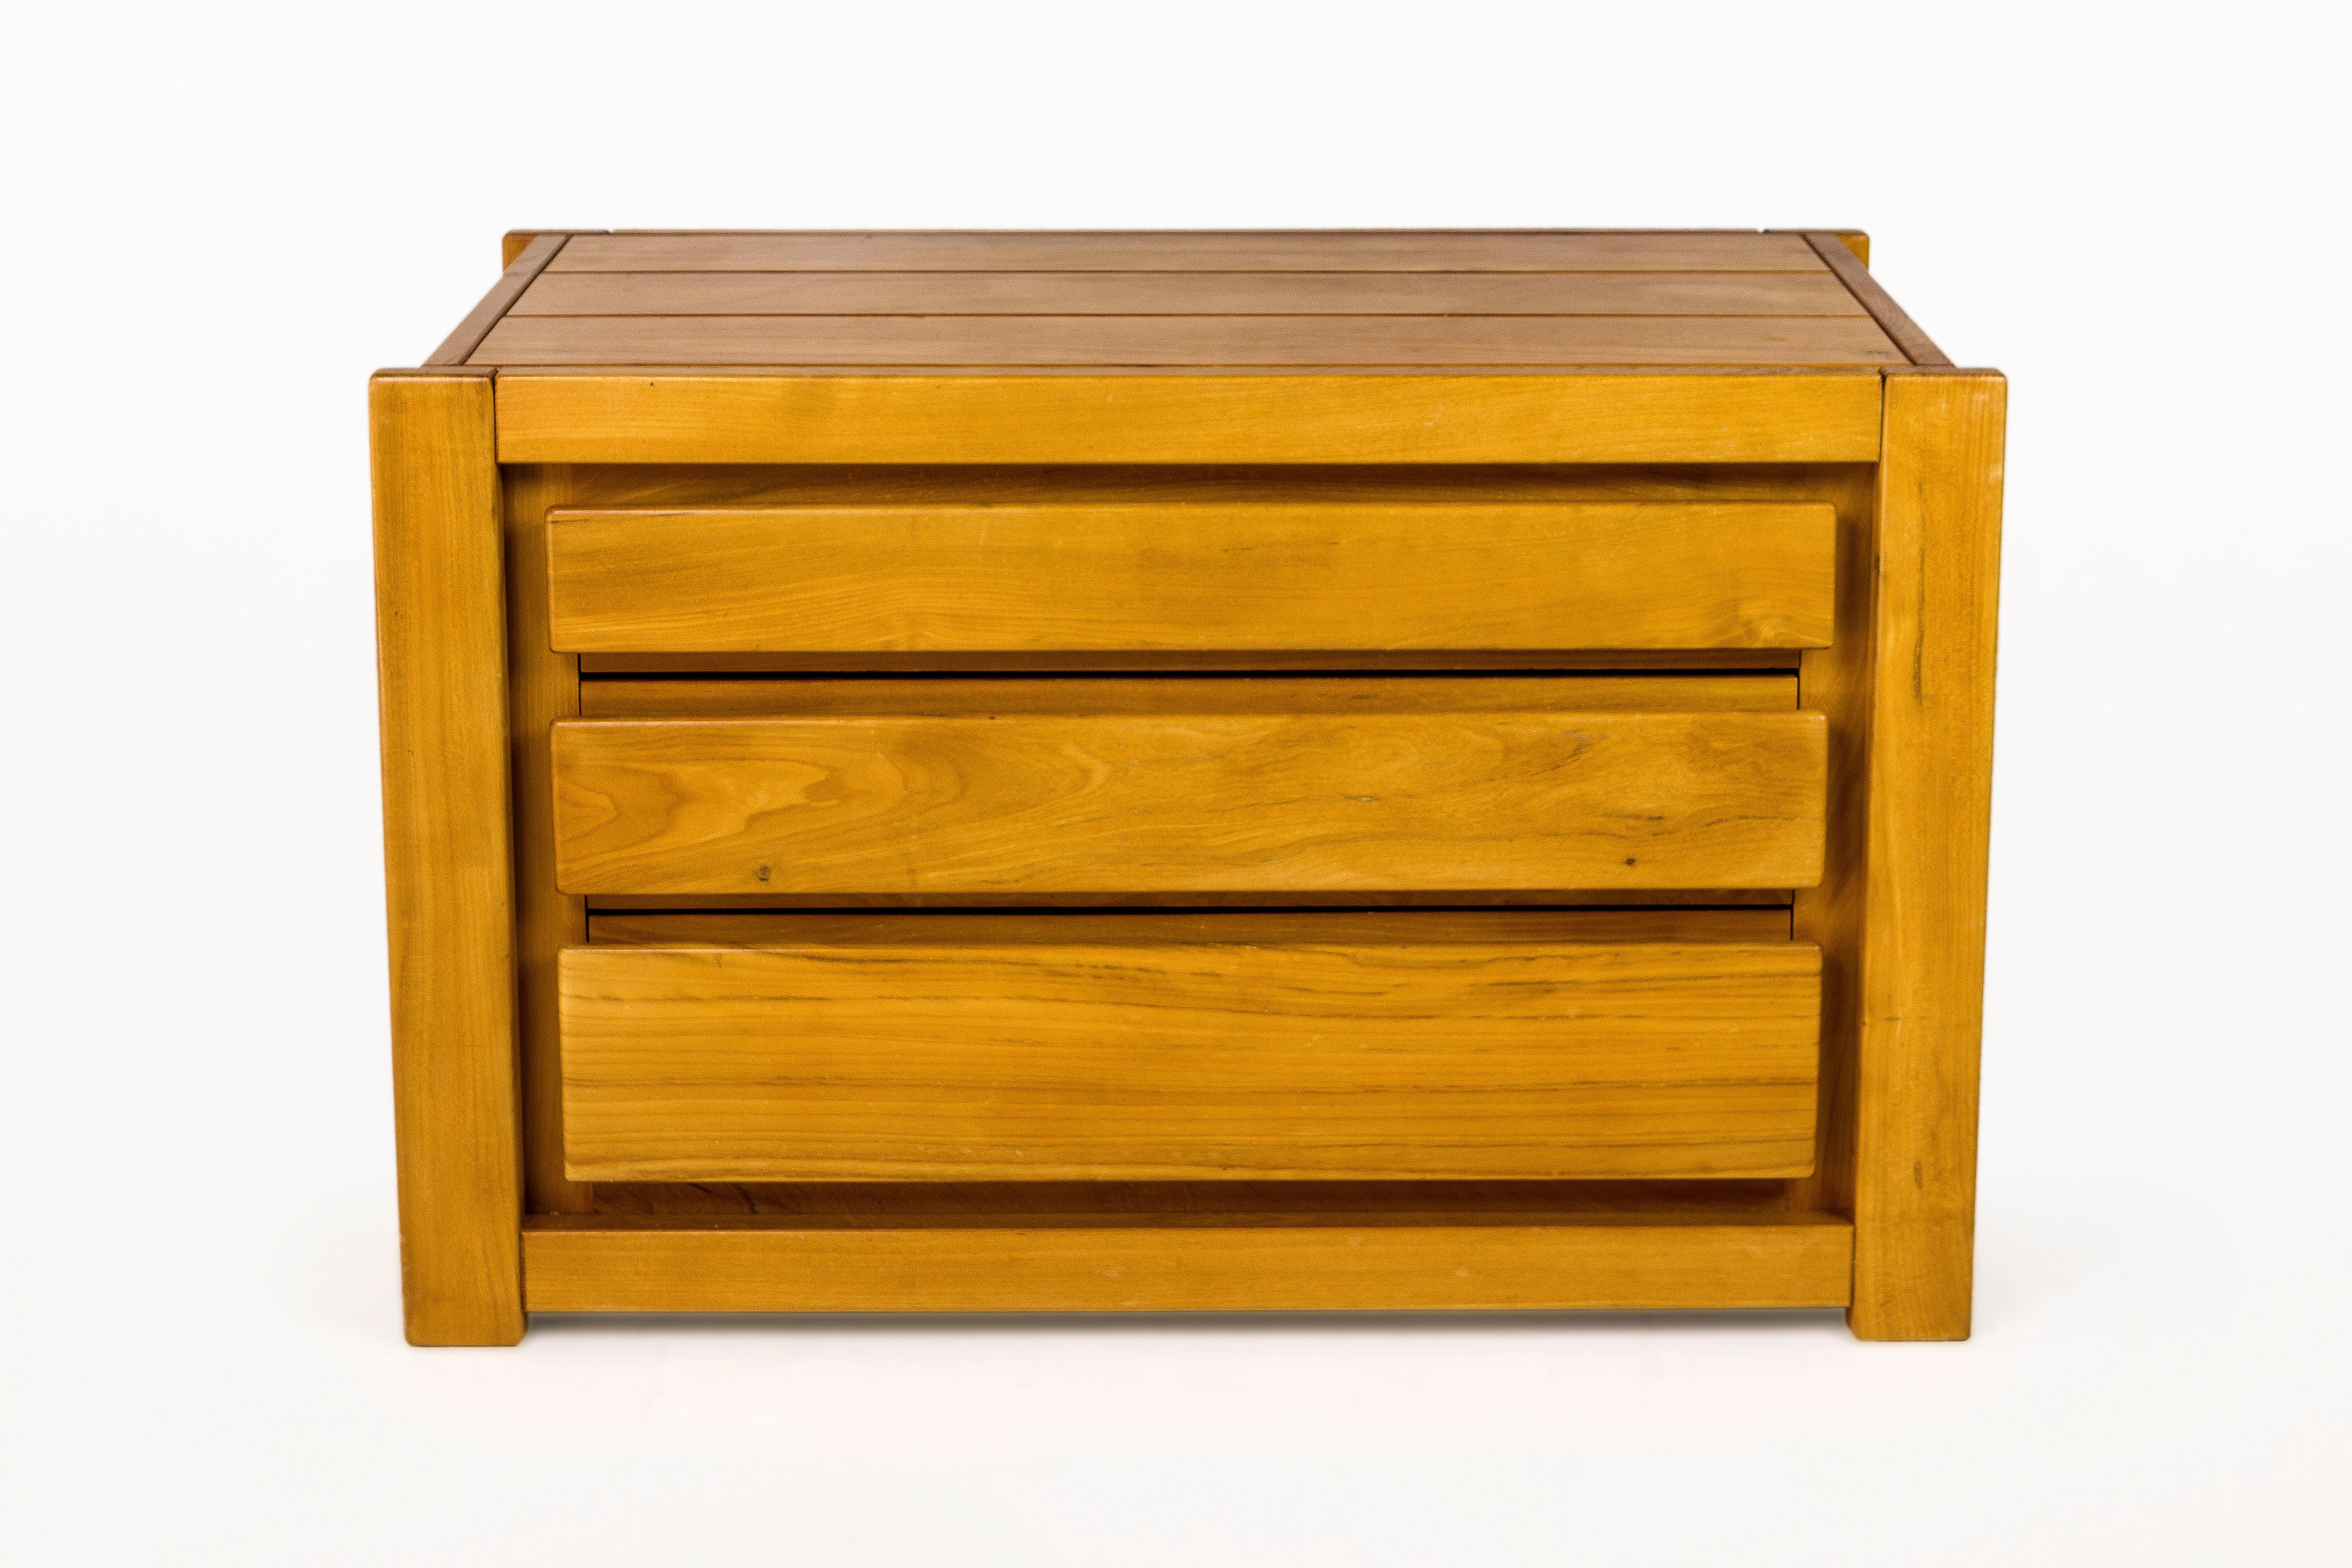 Pair of Maison Regain chest of drawers.
Solid elm.
Three drawers each.
Exquisite craftsmanship,
circa 1960, France.
Very good vintage condition.